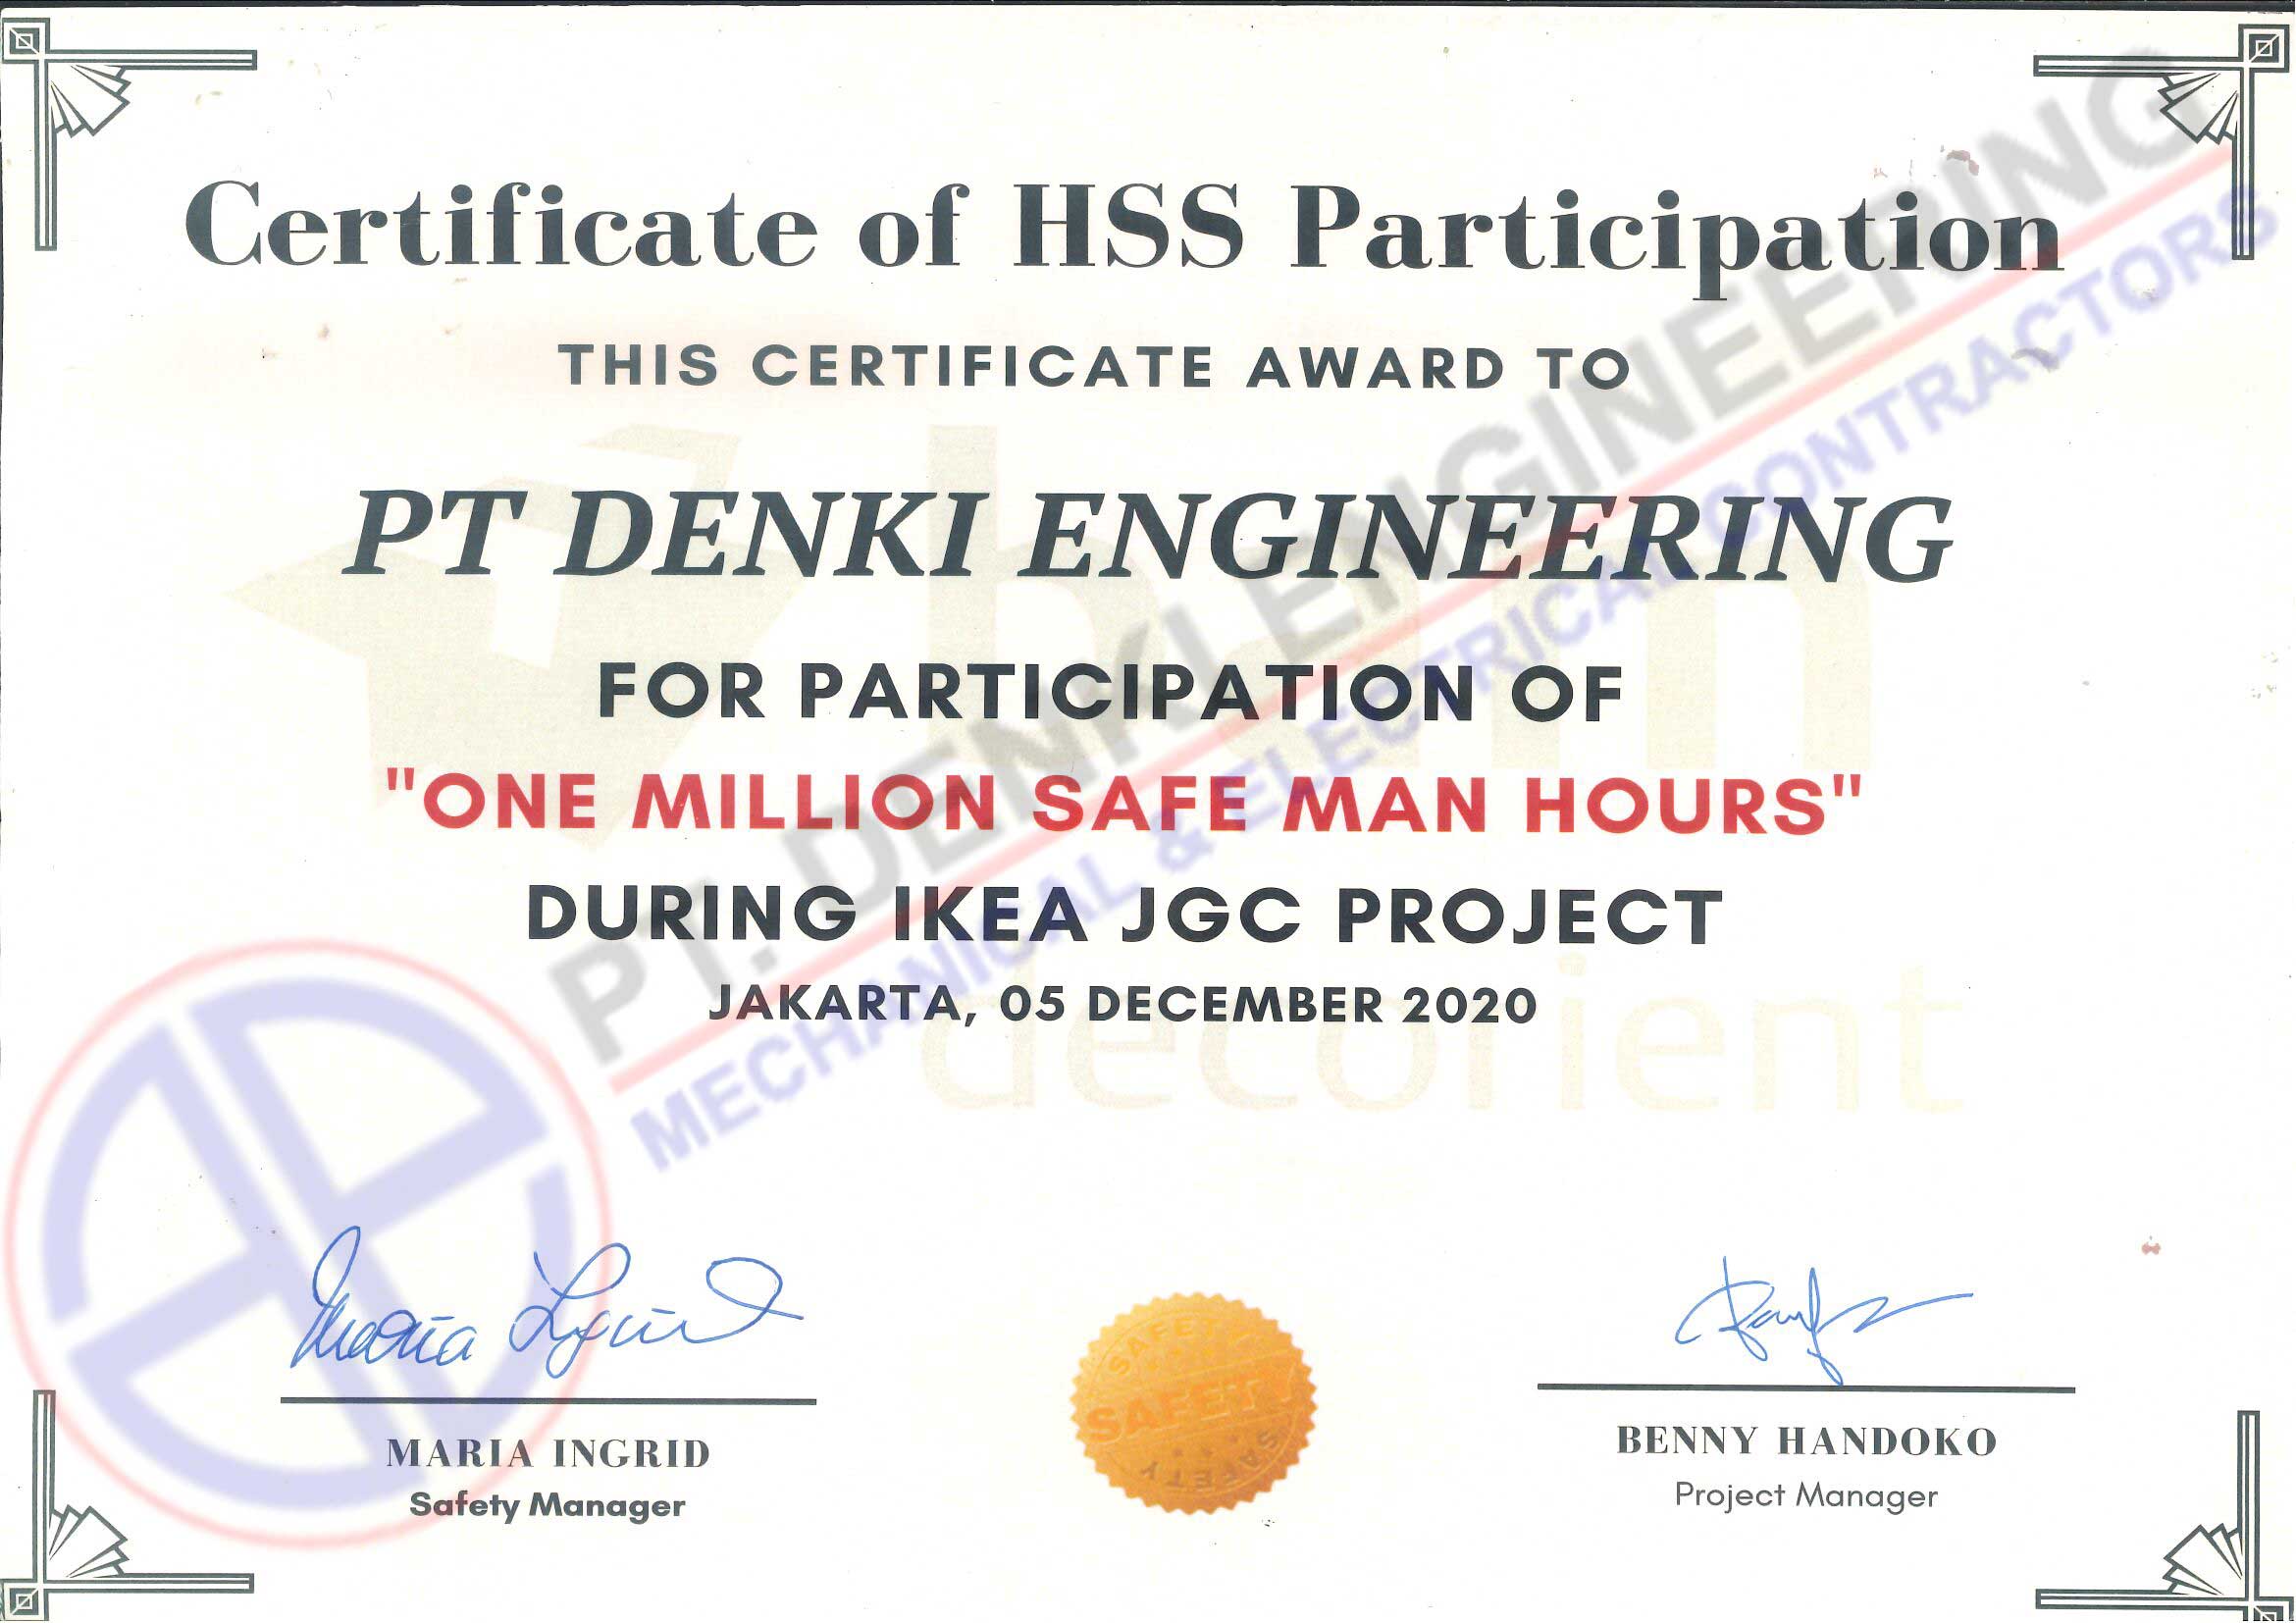 Certificate of HSS Participation 2020